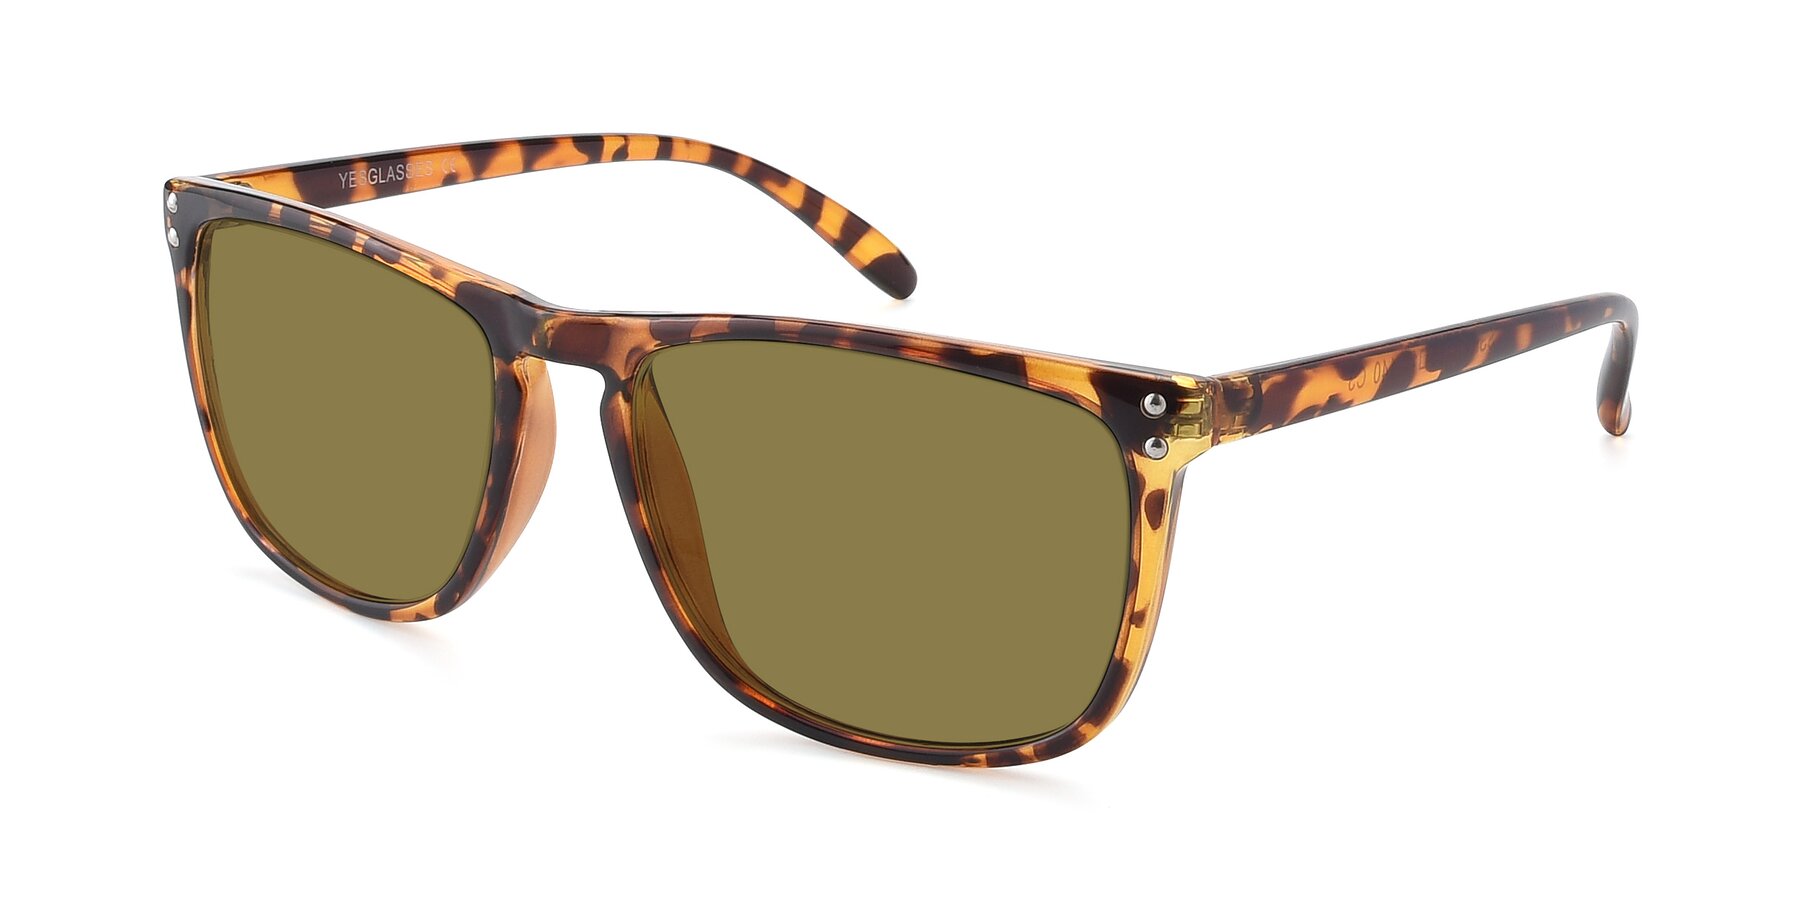 Angle of SSR411 in Translucent Orange Tortoise with Brown Polarized Lenses